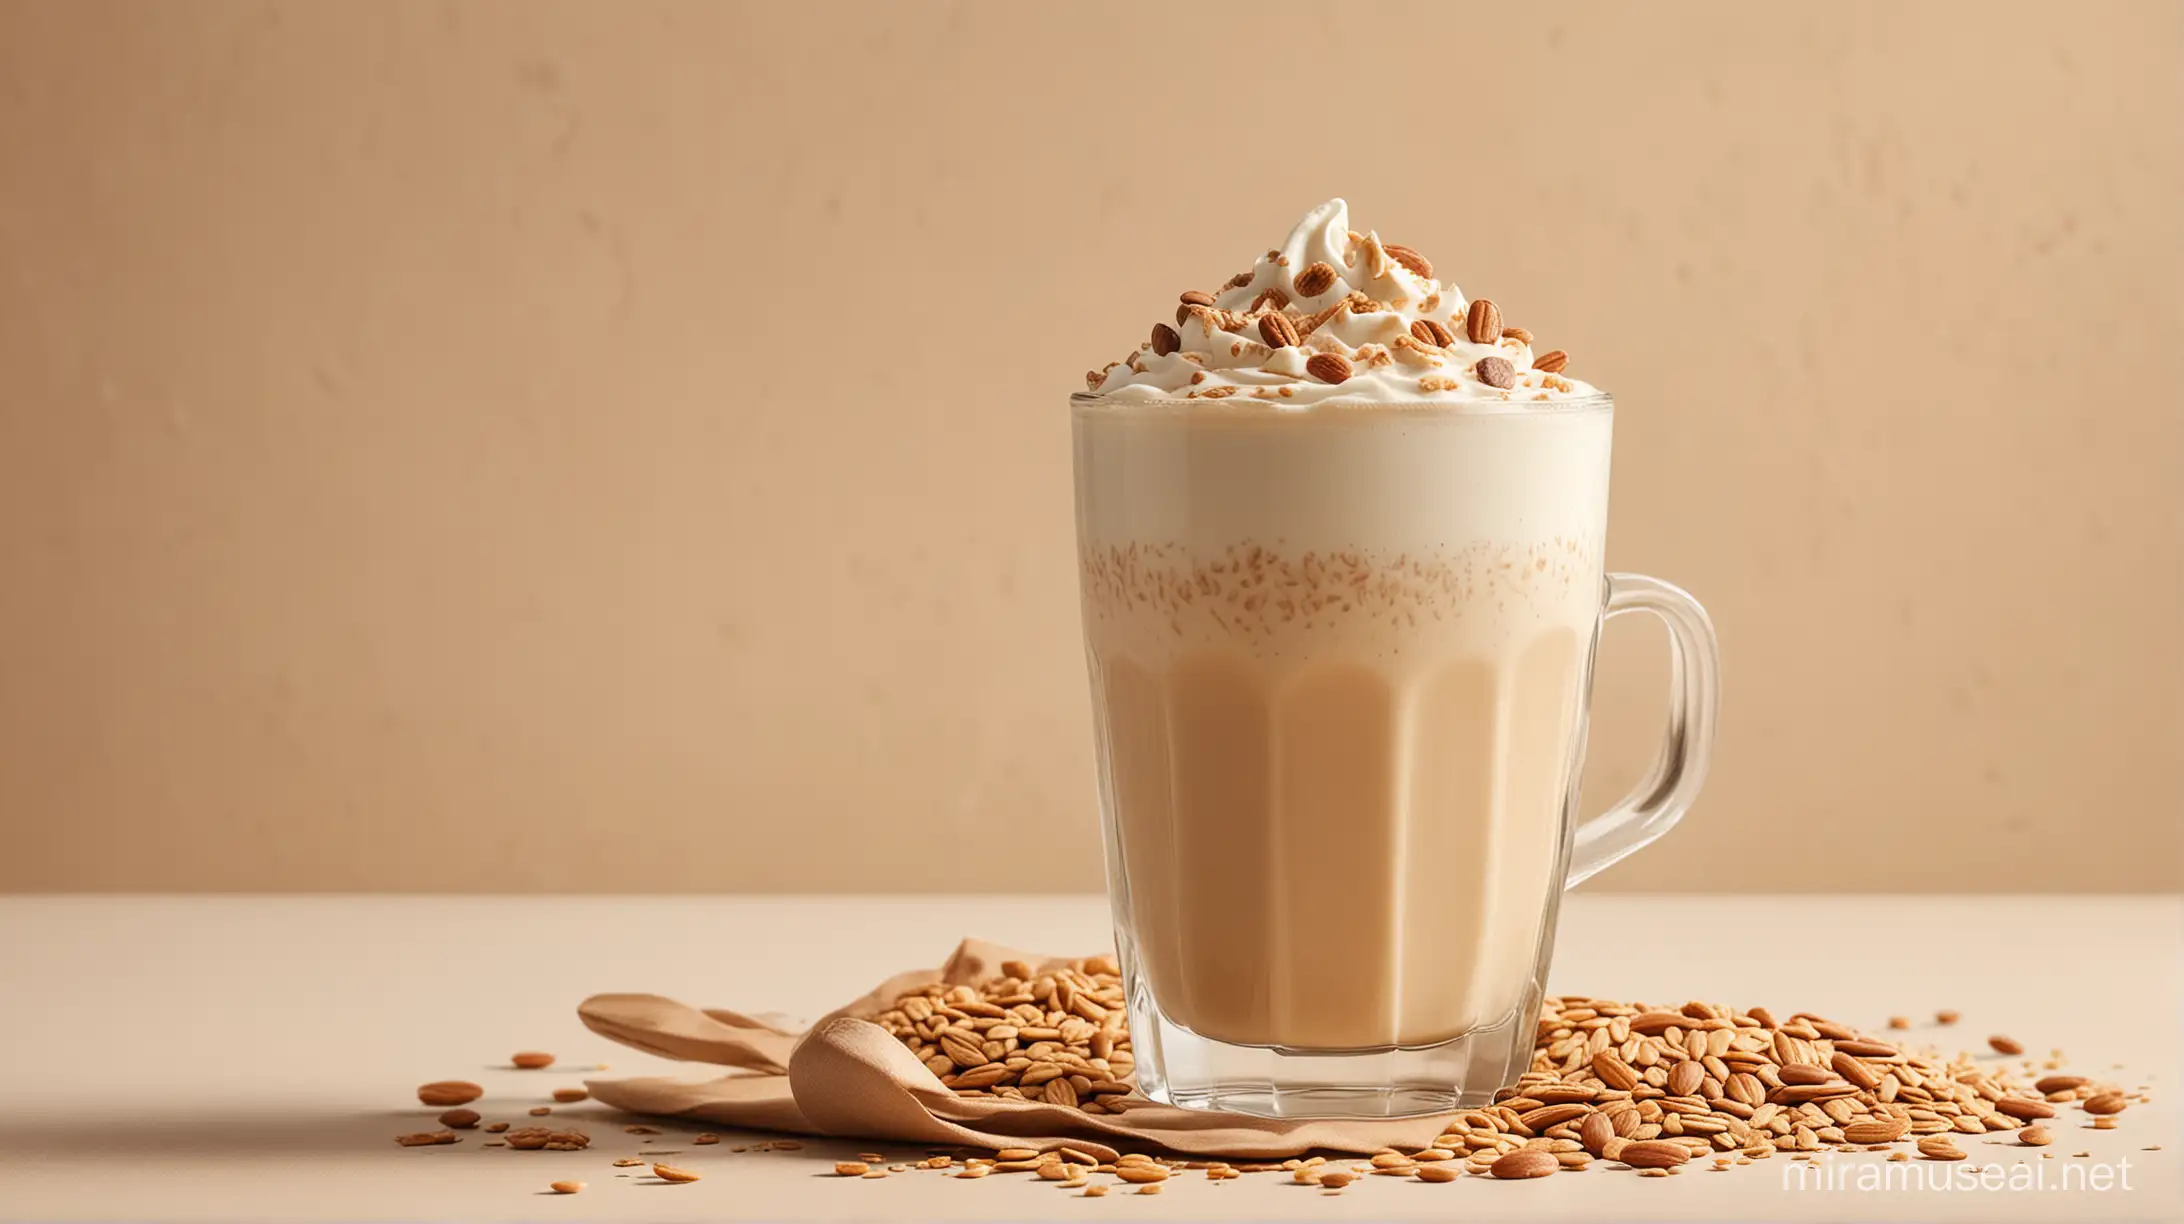 Oats Milk Latte with Cream Background Refreshing Beverage Concept for Serene Atmosphere